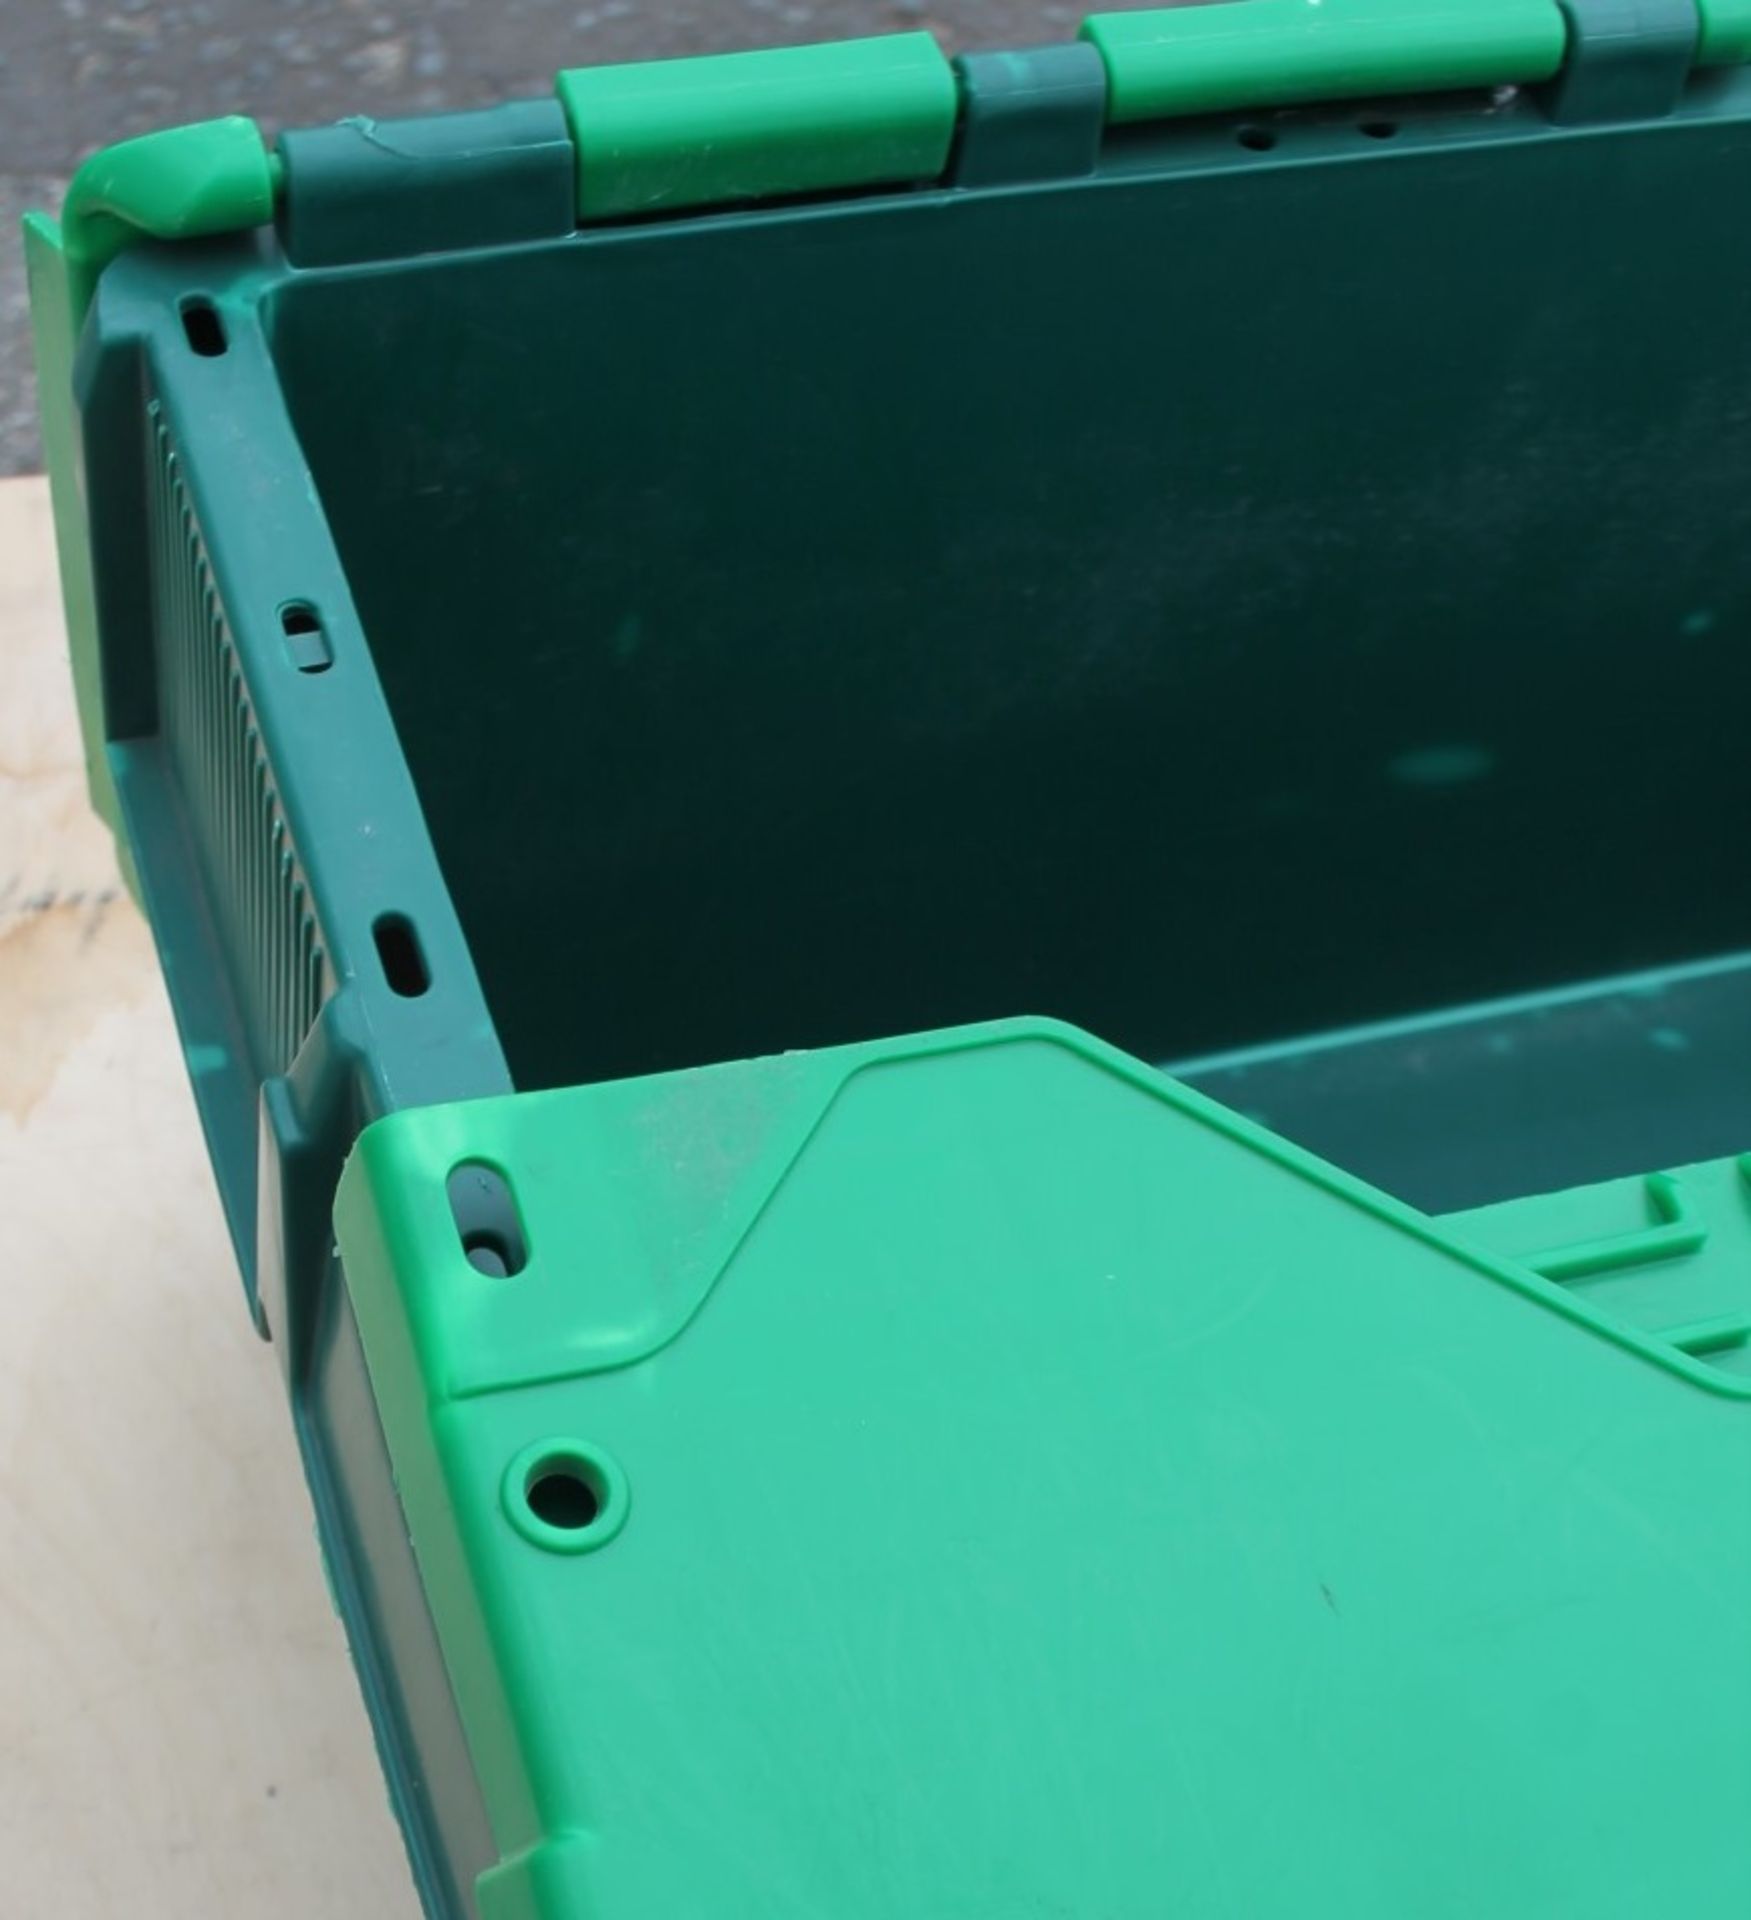 20 x Robust Low Profile Green Plastic Secure Storage Boxes With Attached Hinged Lids - Dimensions: - Image 4 of 6